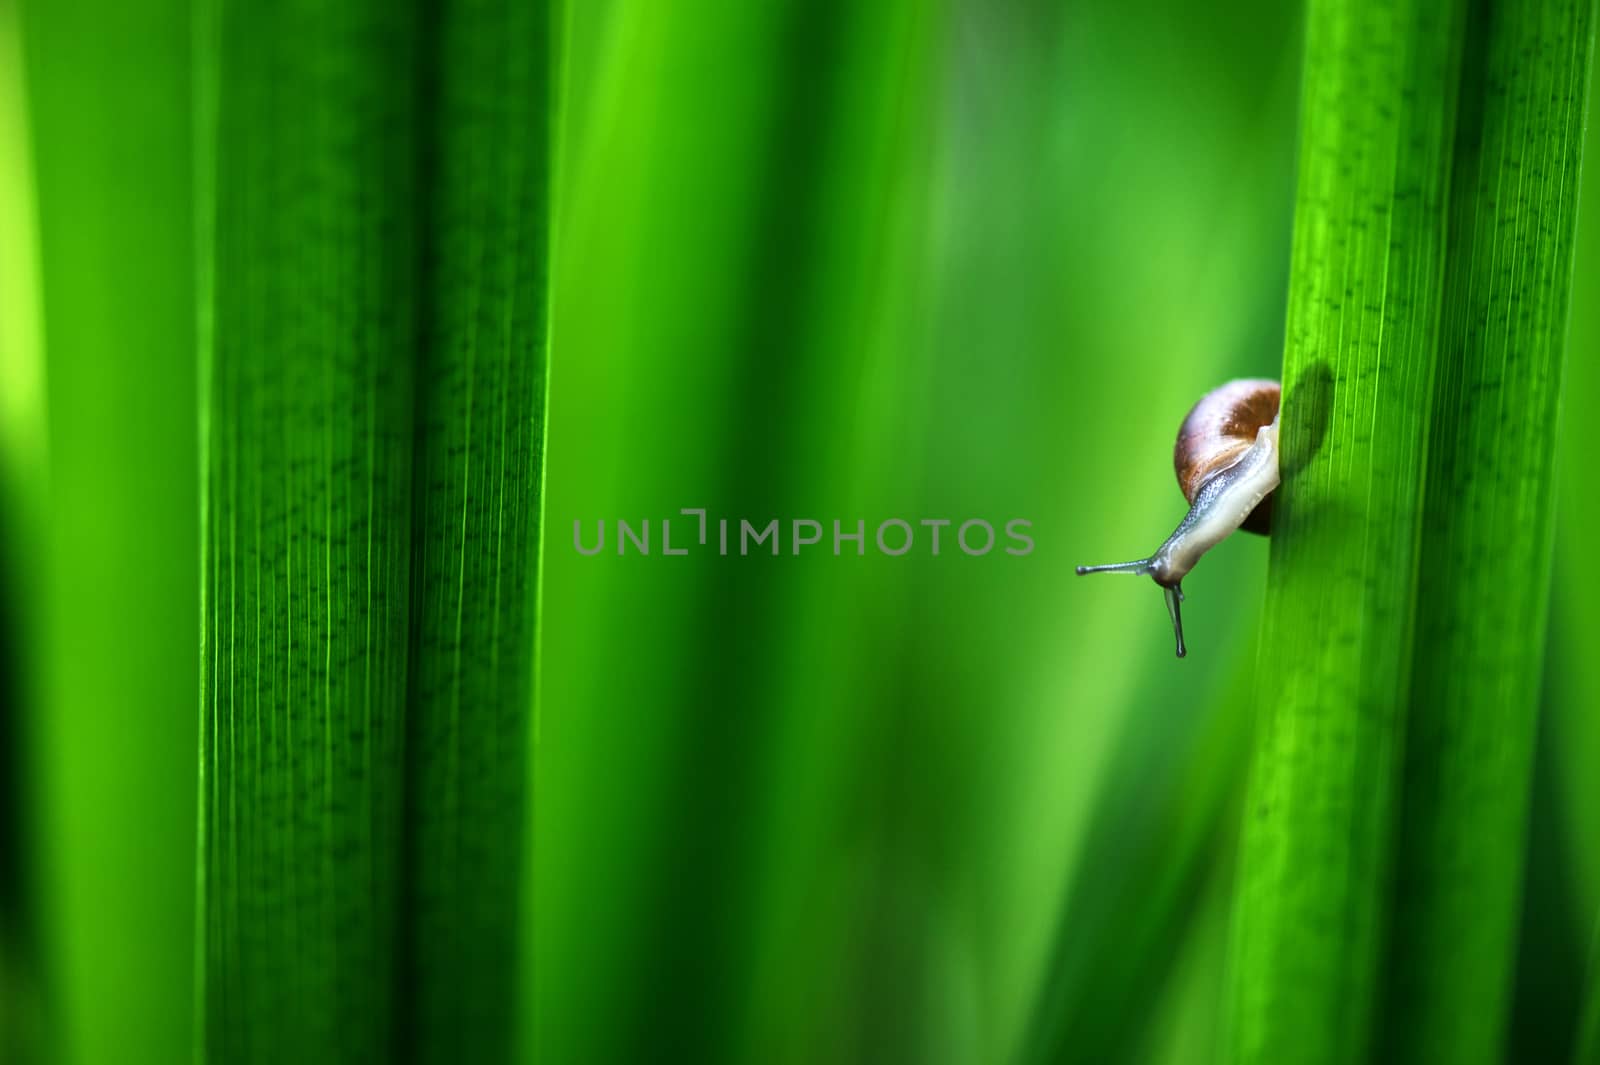 Snail on leaves by FreeProd